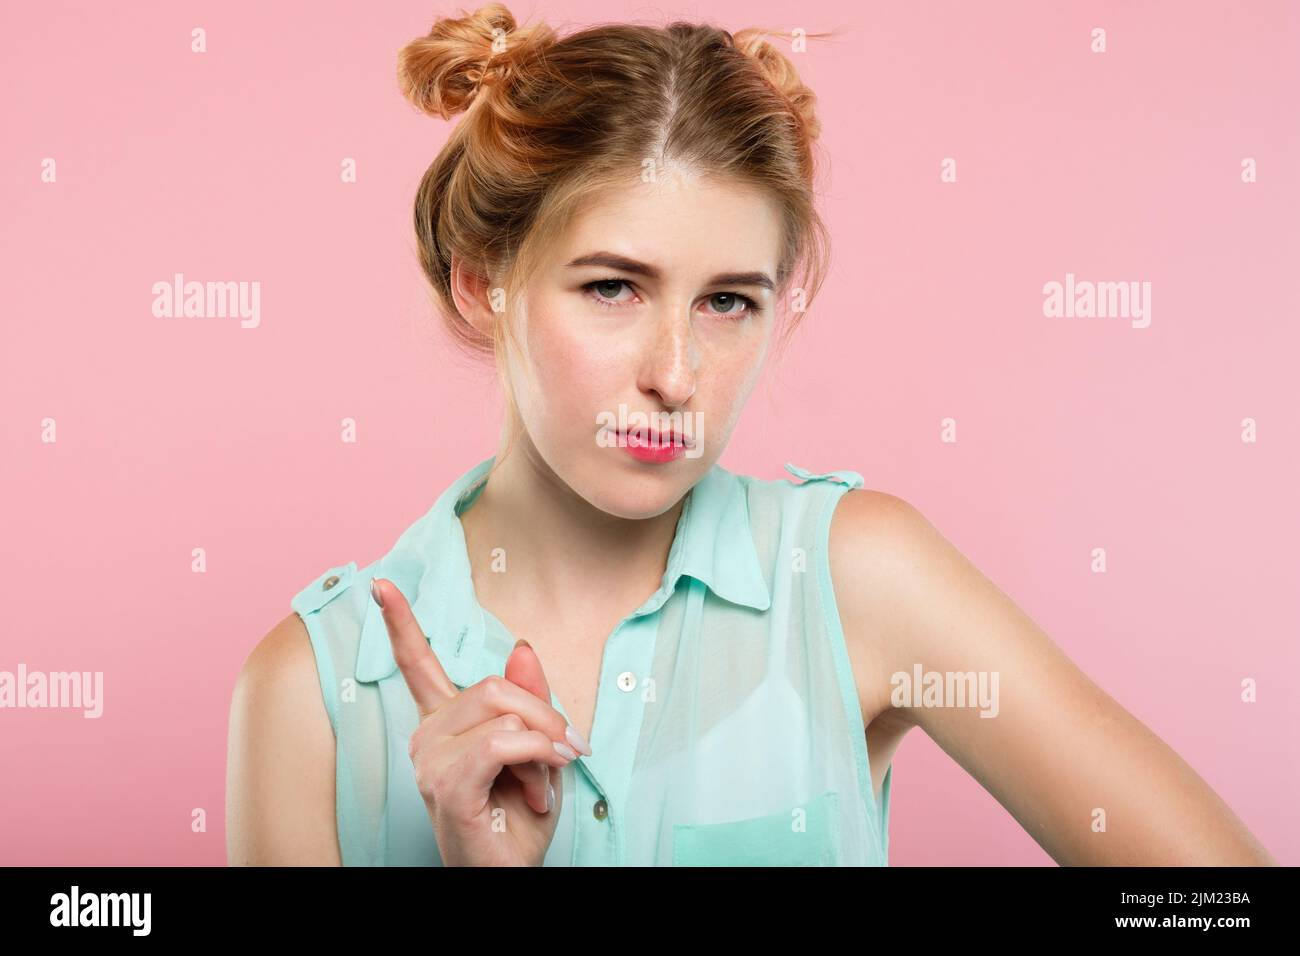 serious strict woman scold nag tell off wag finger Stock Photo